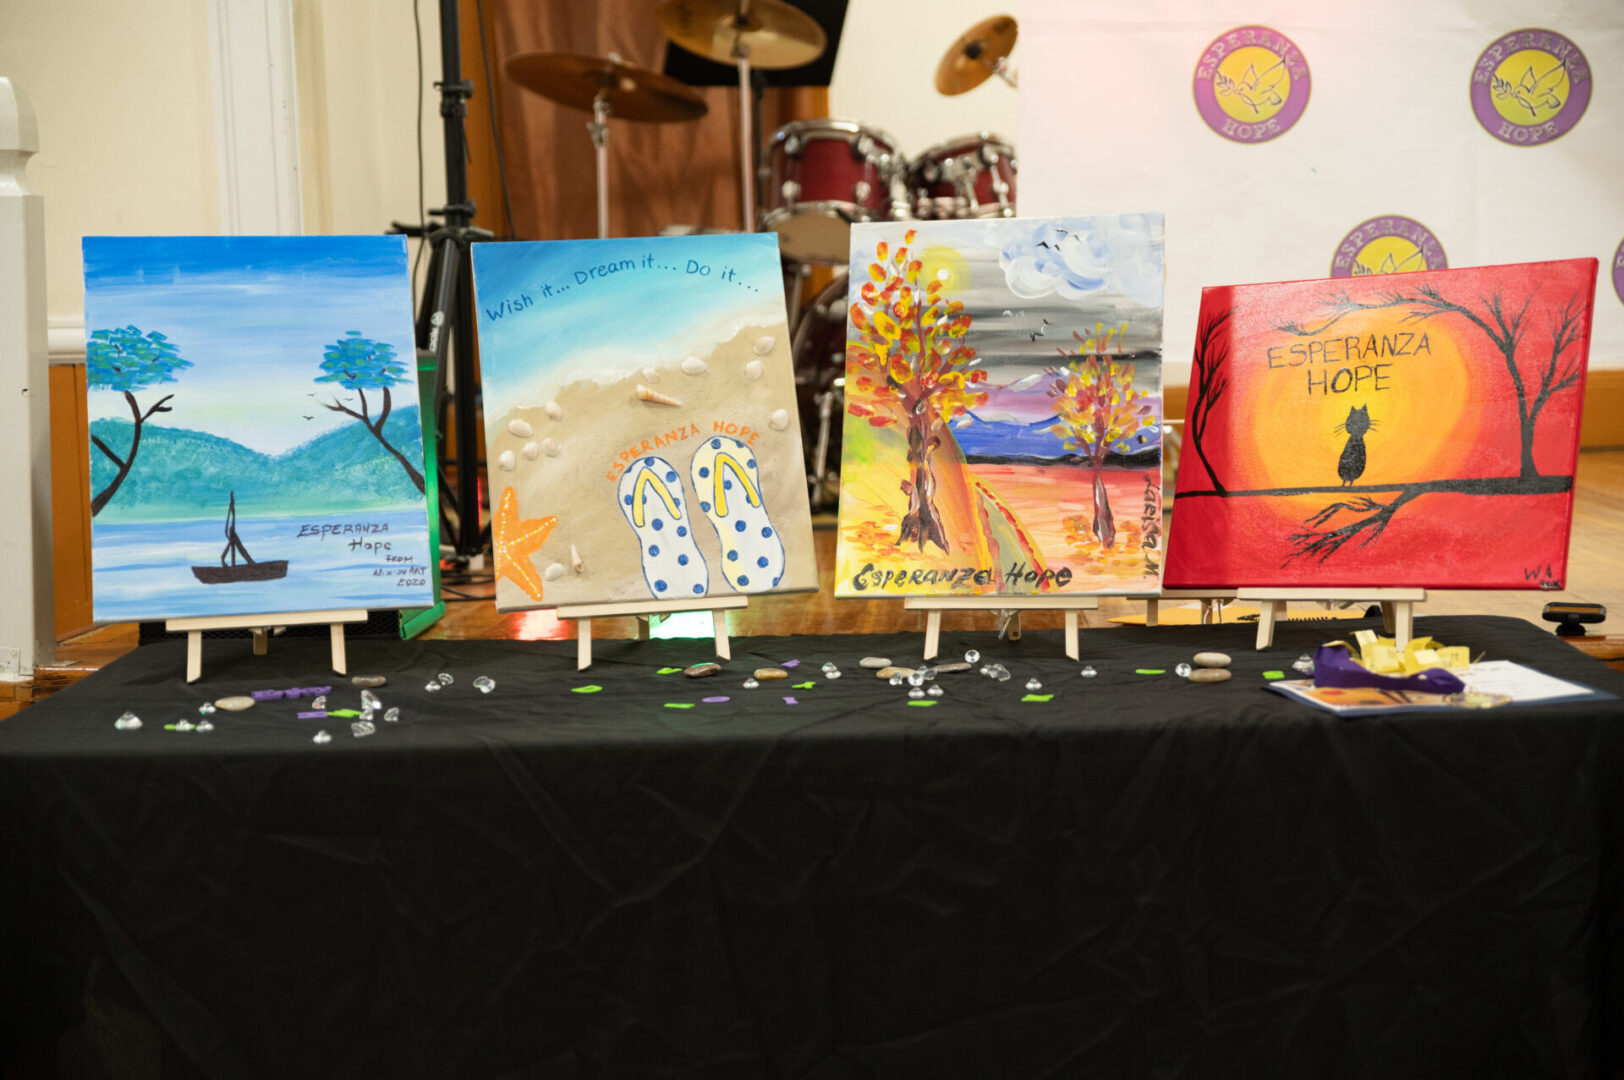 Four paintings made by Esperanza-Hope